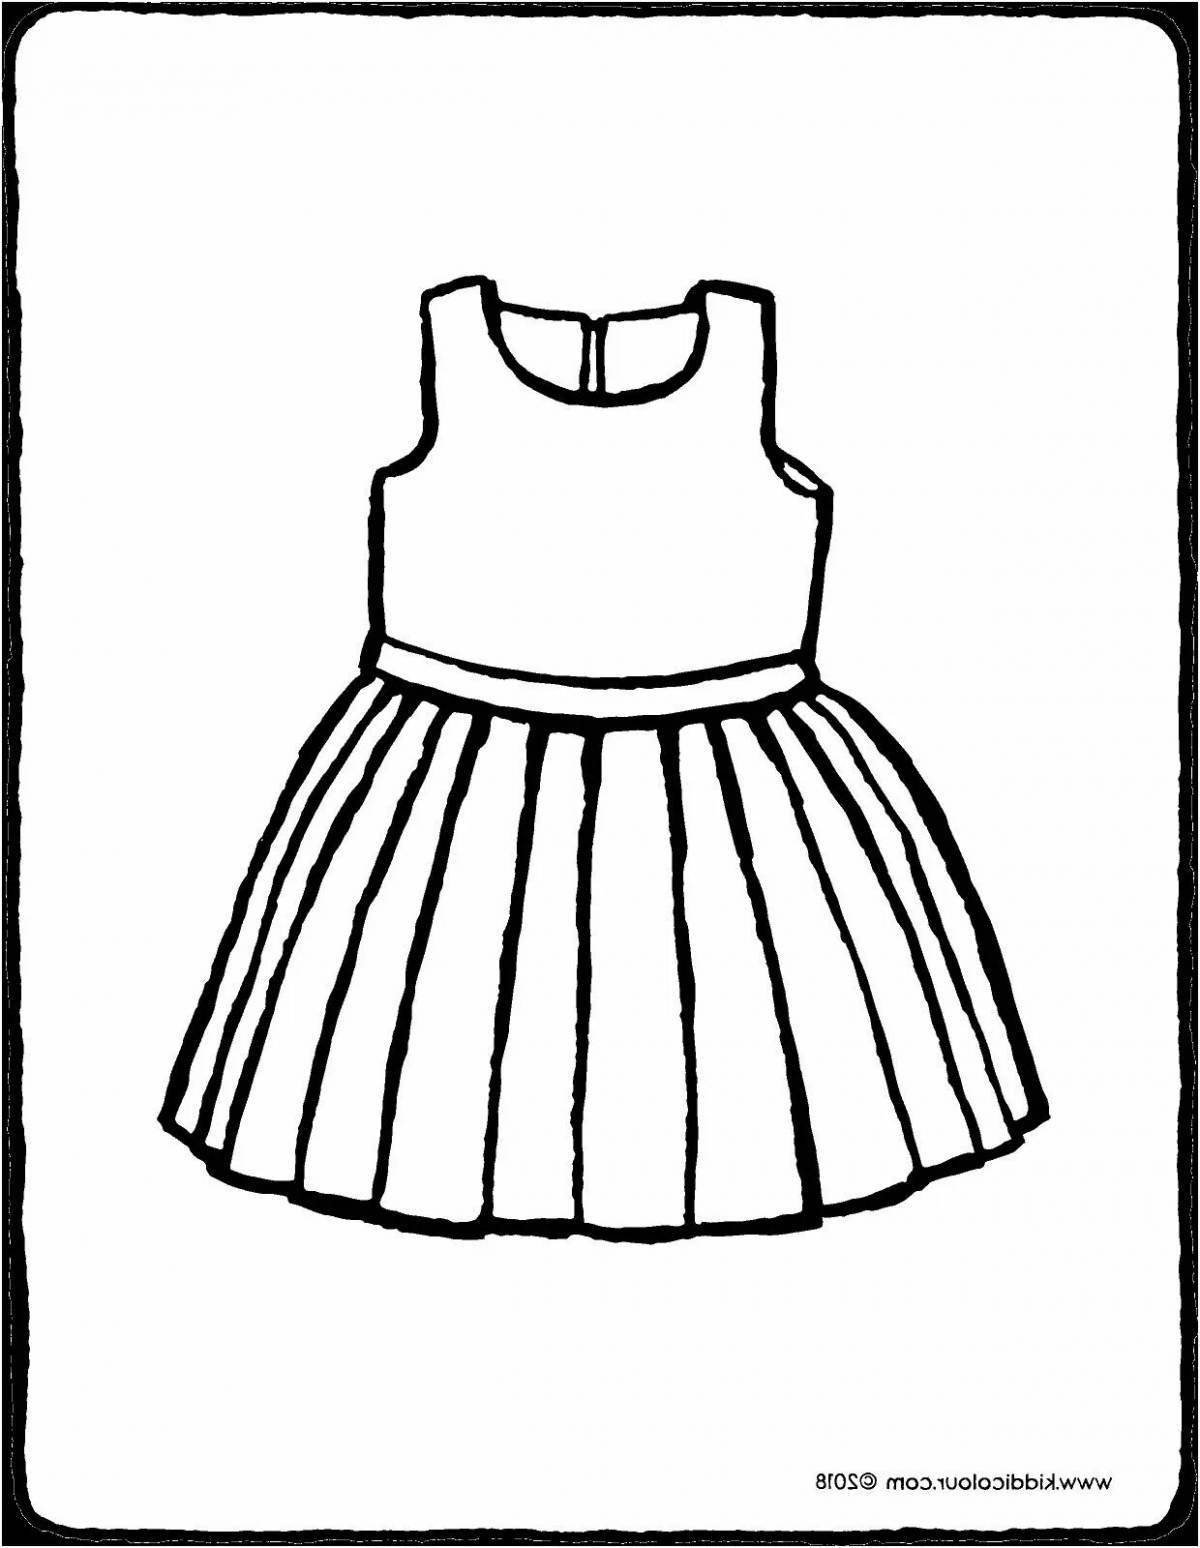 Colorful sundress coloring book for kids